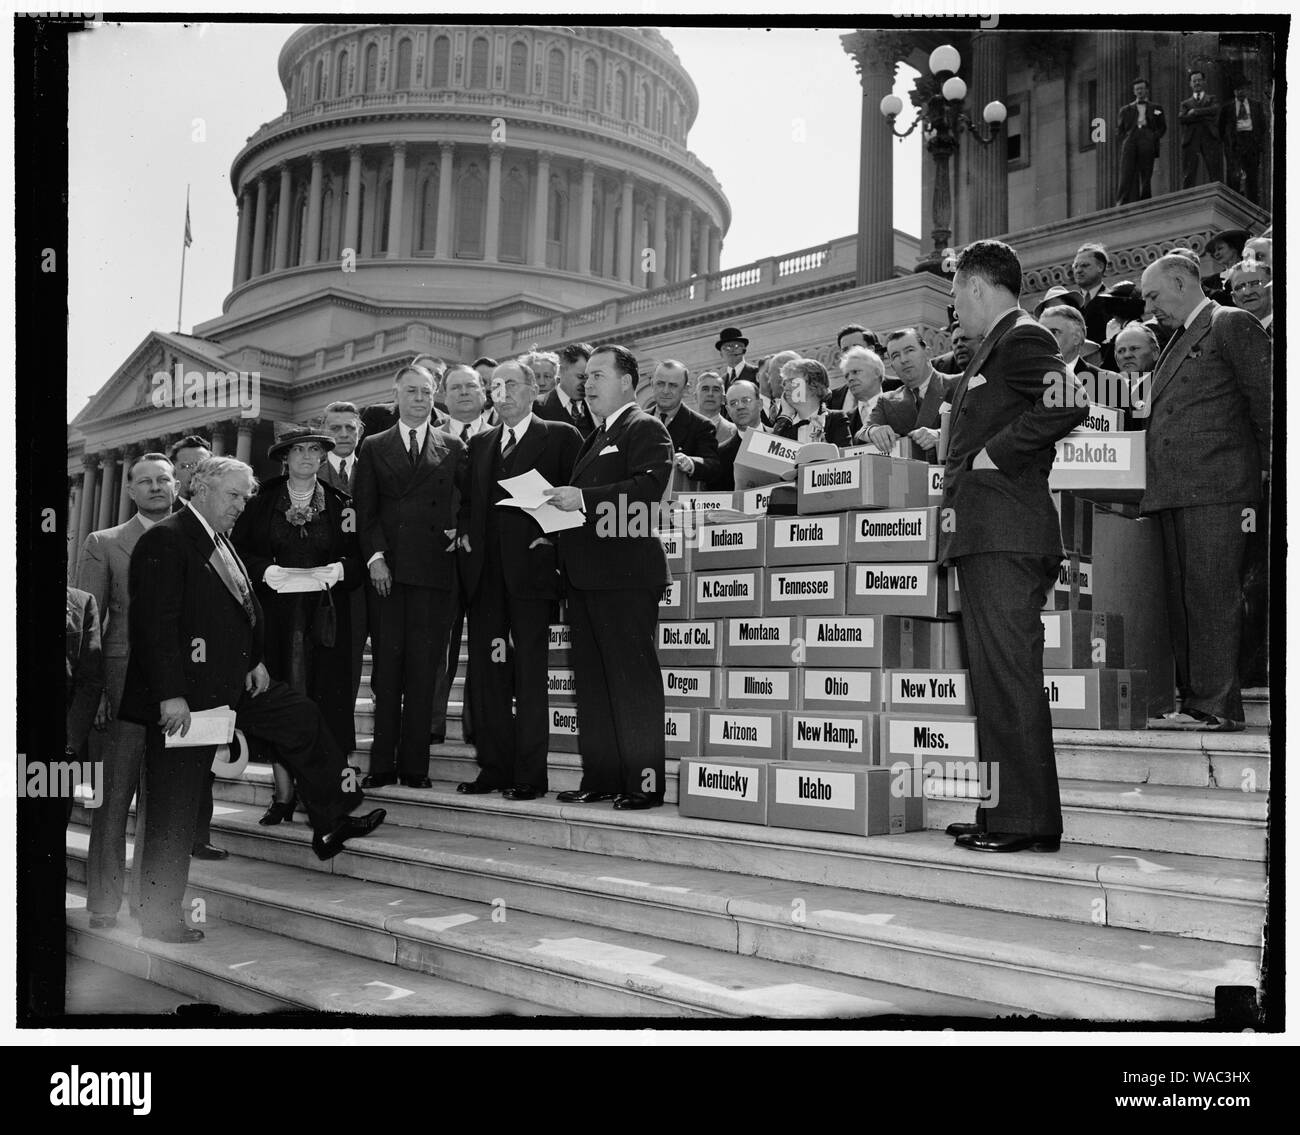 Keep America Out of War petitions presented to Congress. Washington, D.C., April 27. Keep America Out of War was keynote of four million petitions presented to members of Congress at the Capitol today by the veterans of Foreign Wars. Senator Key Pittman as President Pro Tempore of the Senate, received the petitions for the Senate. In the photograph, left to right, can be seen: Senator Pat McCarran, Nevada; Mrs Laurie M. Schertle, Nat. President, Ladies Auxiliary, Veterans of Foreign Wars; Senator Key Pittmen; Speaker of the House William D. Bankhead; and Scott P. Squires, Commander-in-Chief of Stock Photo